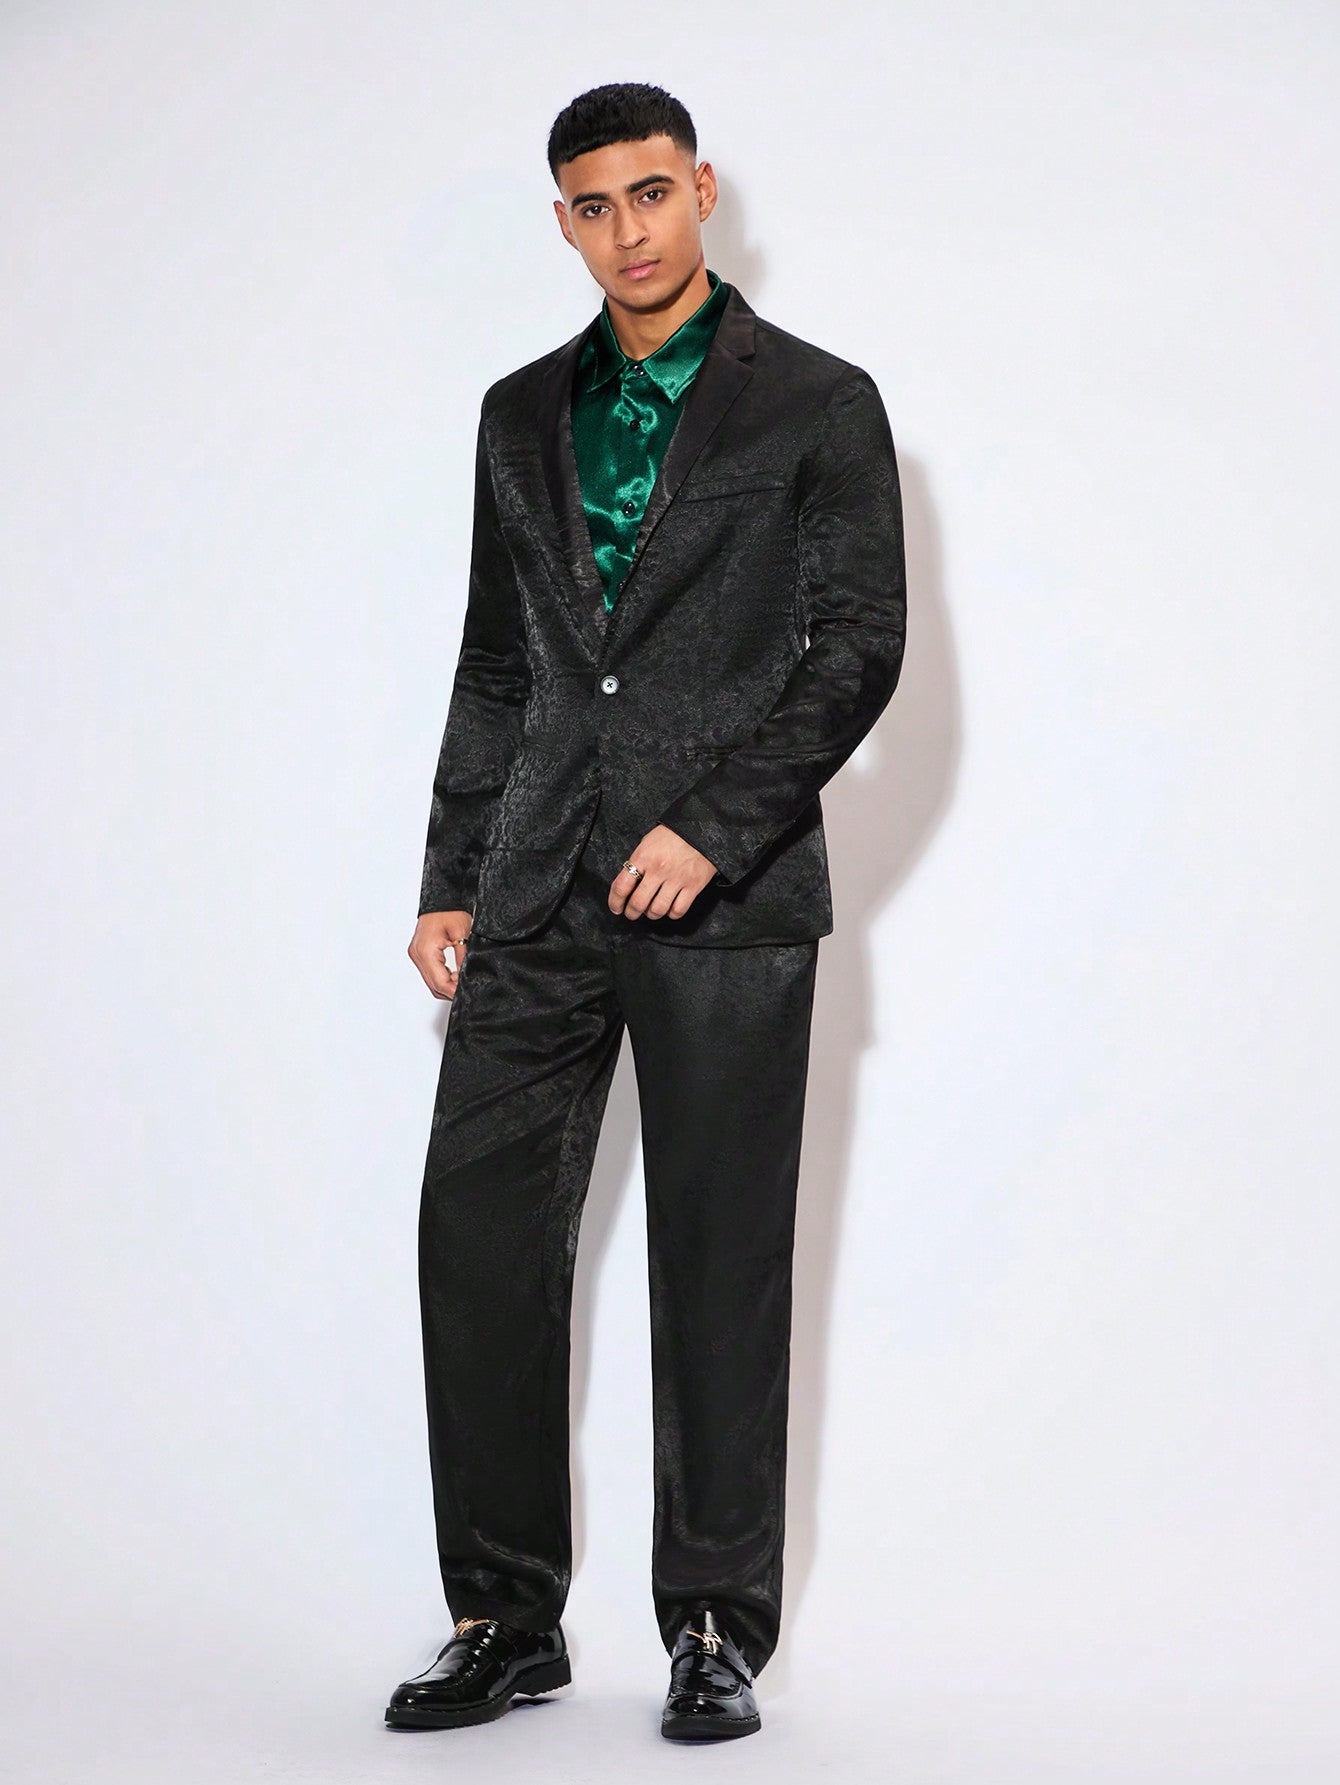 Men's Floral Jacquard Suit, Jacket And Pants Set For Festive Occasions Like Weddings And Parties